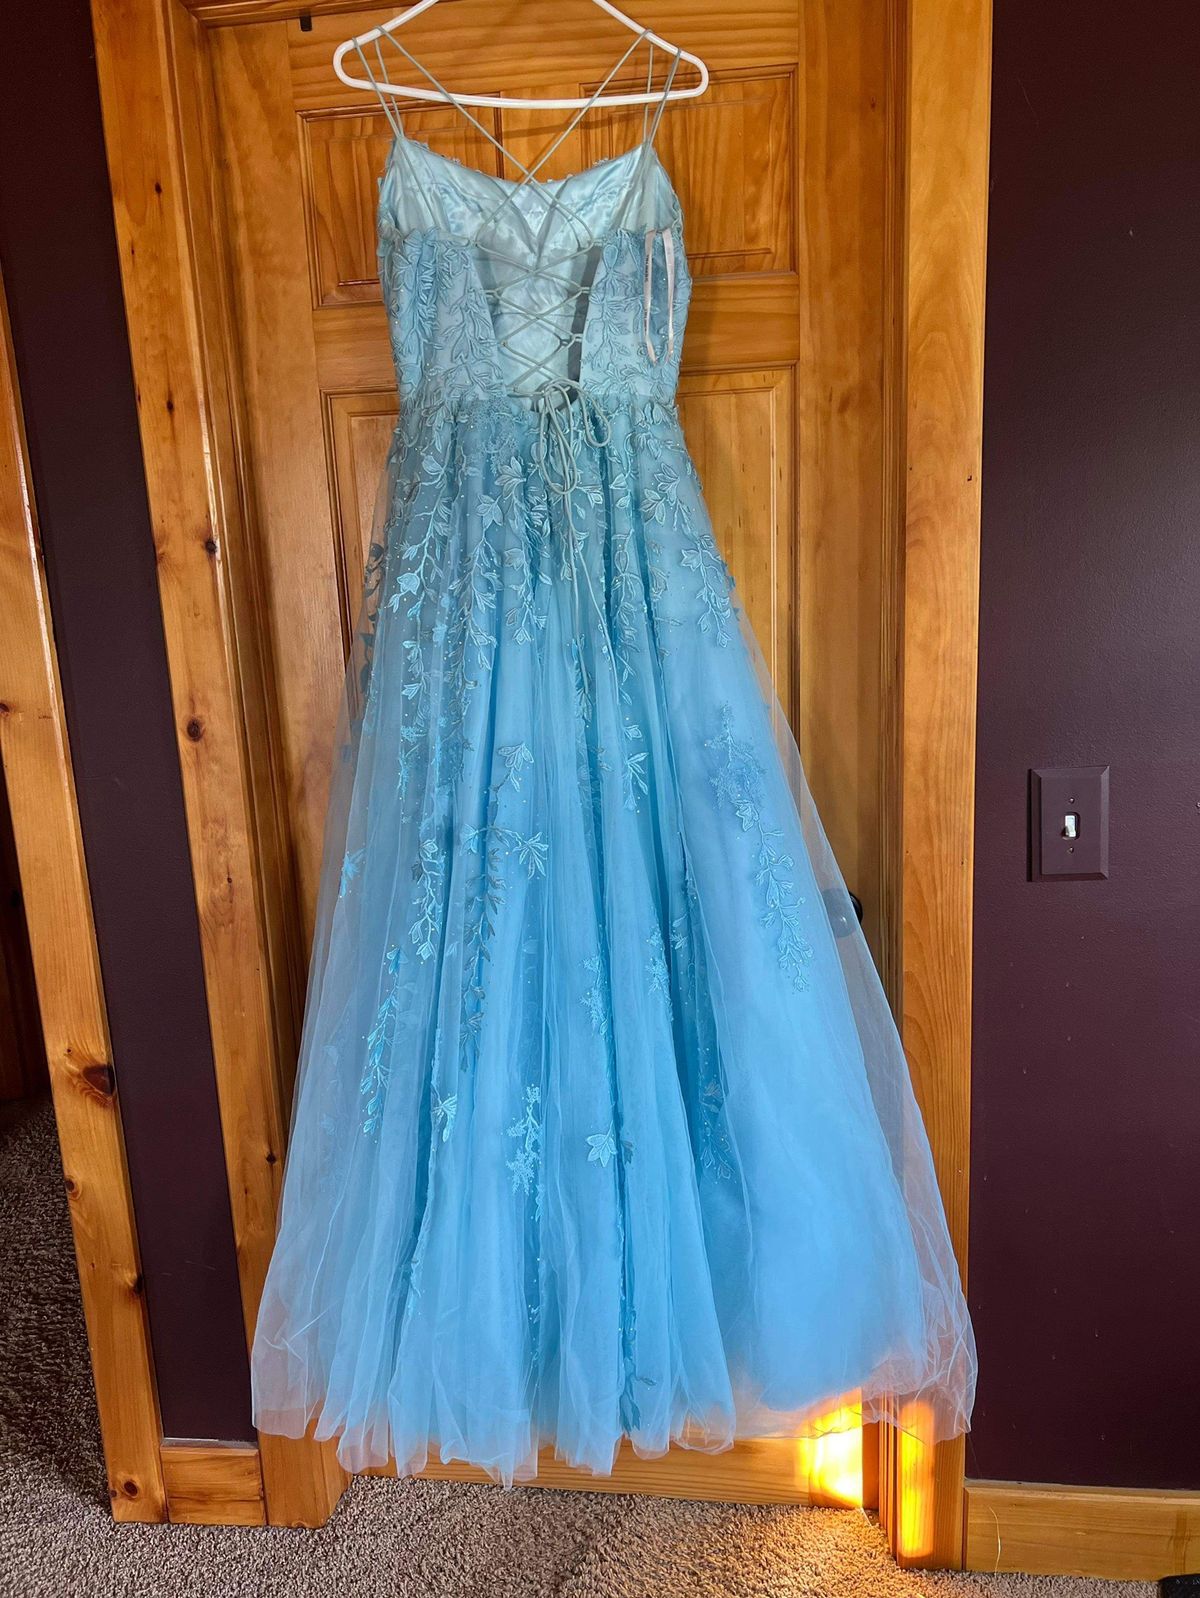 Sherri Hill Size 10 Blue Ball Gown on Queenly